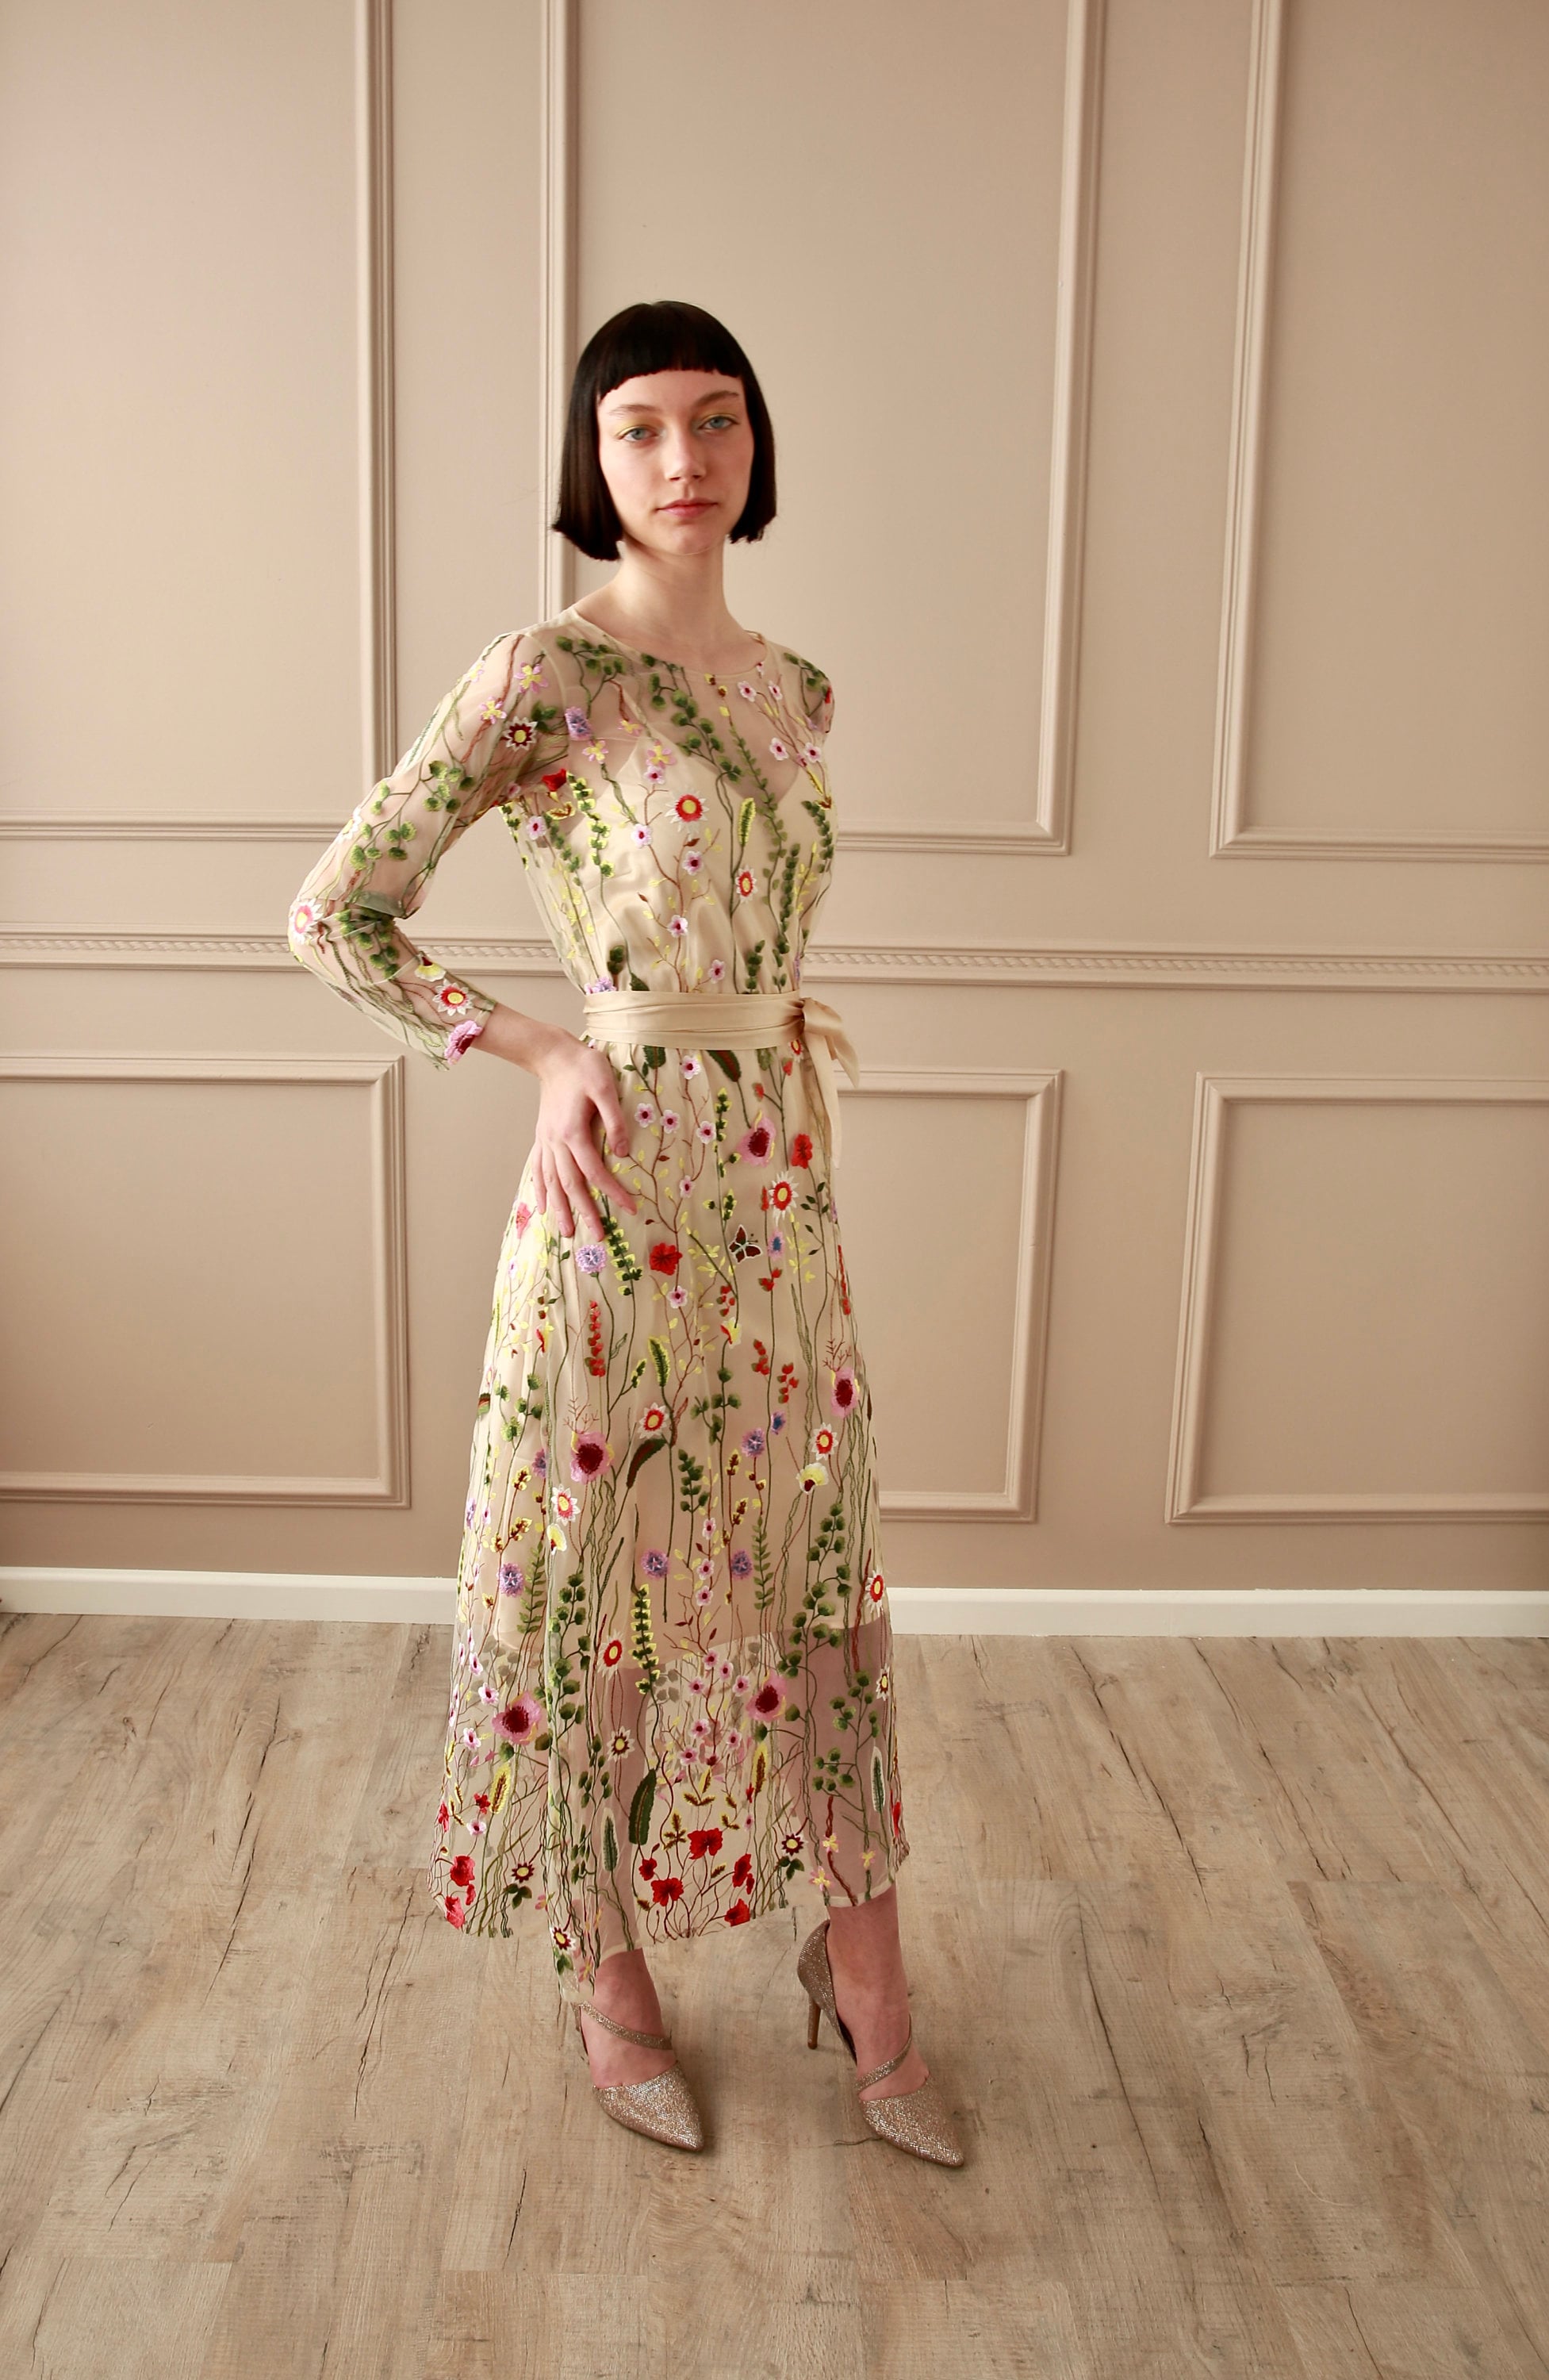 floral embroidery dress